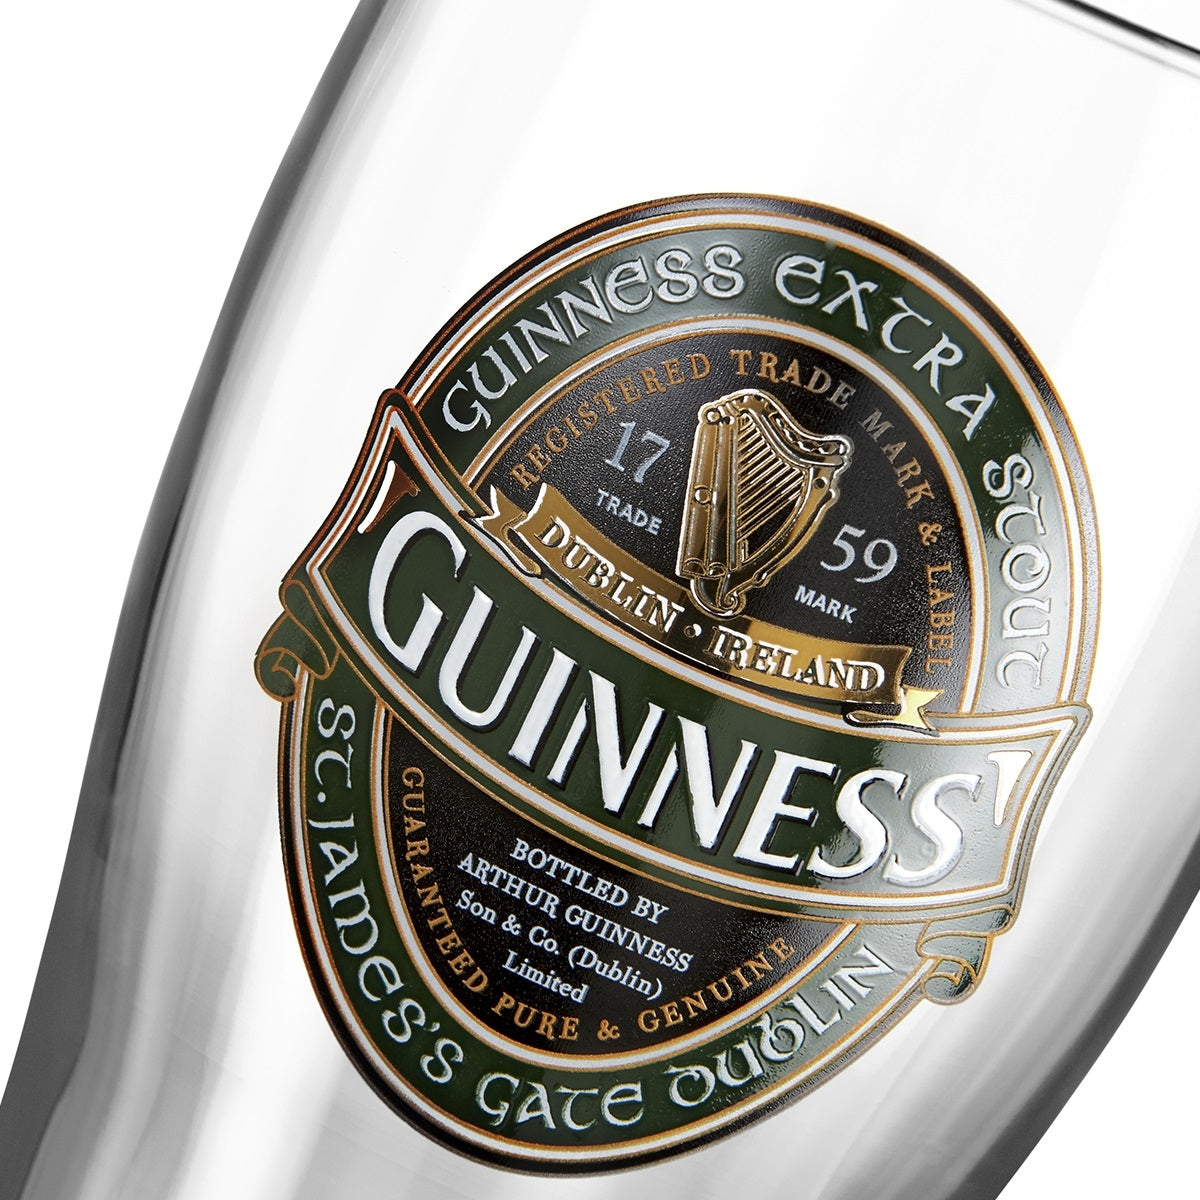 An Guinness Ireland Collection pint glass featuring the iconic label.